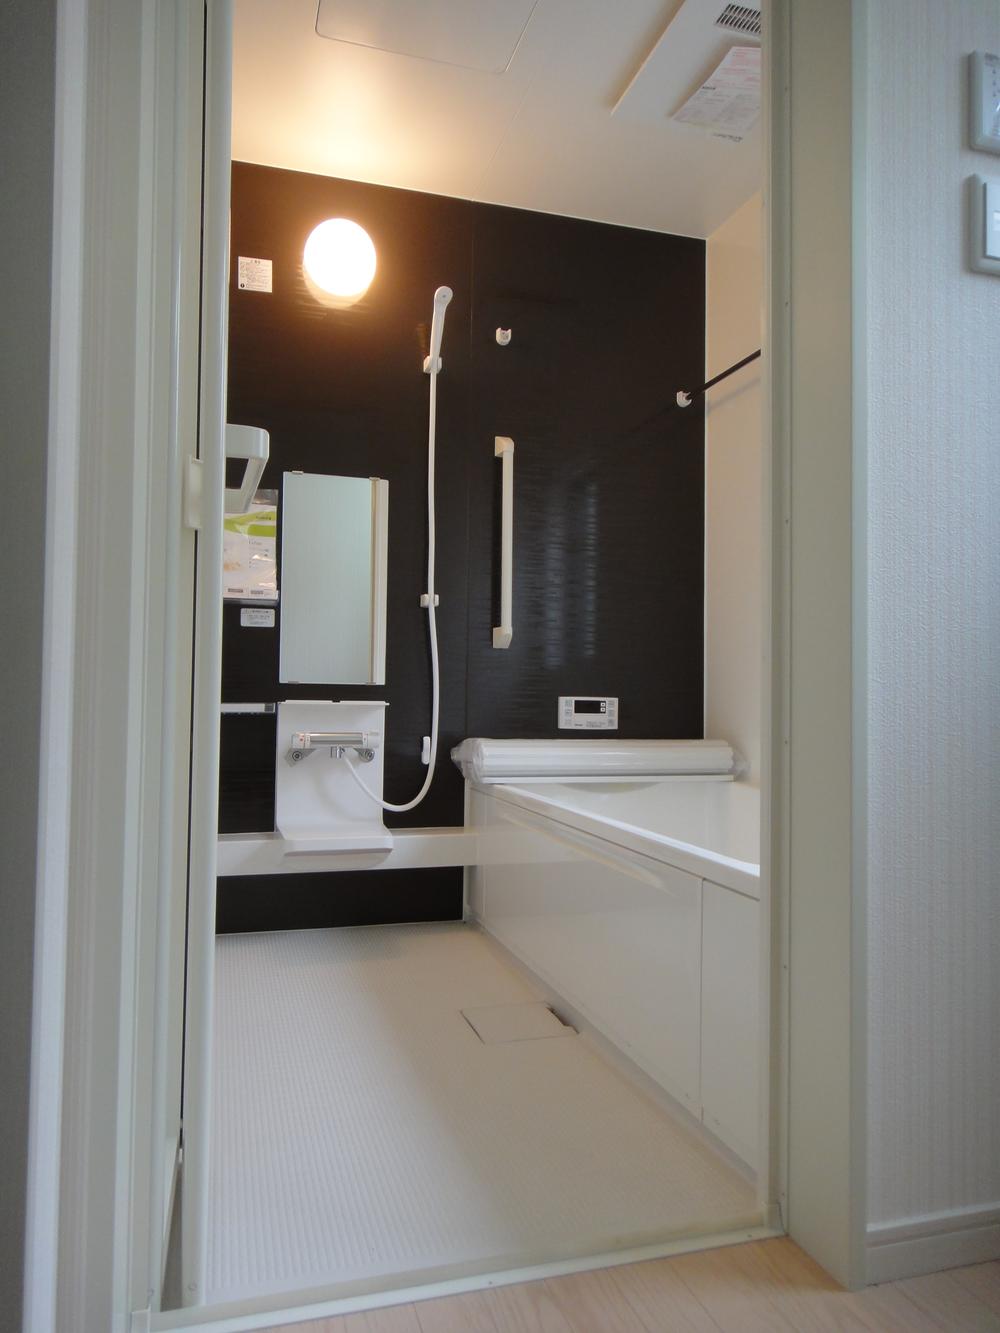 Same specifications photo (bathroom). Loose is a bath one tsubo size